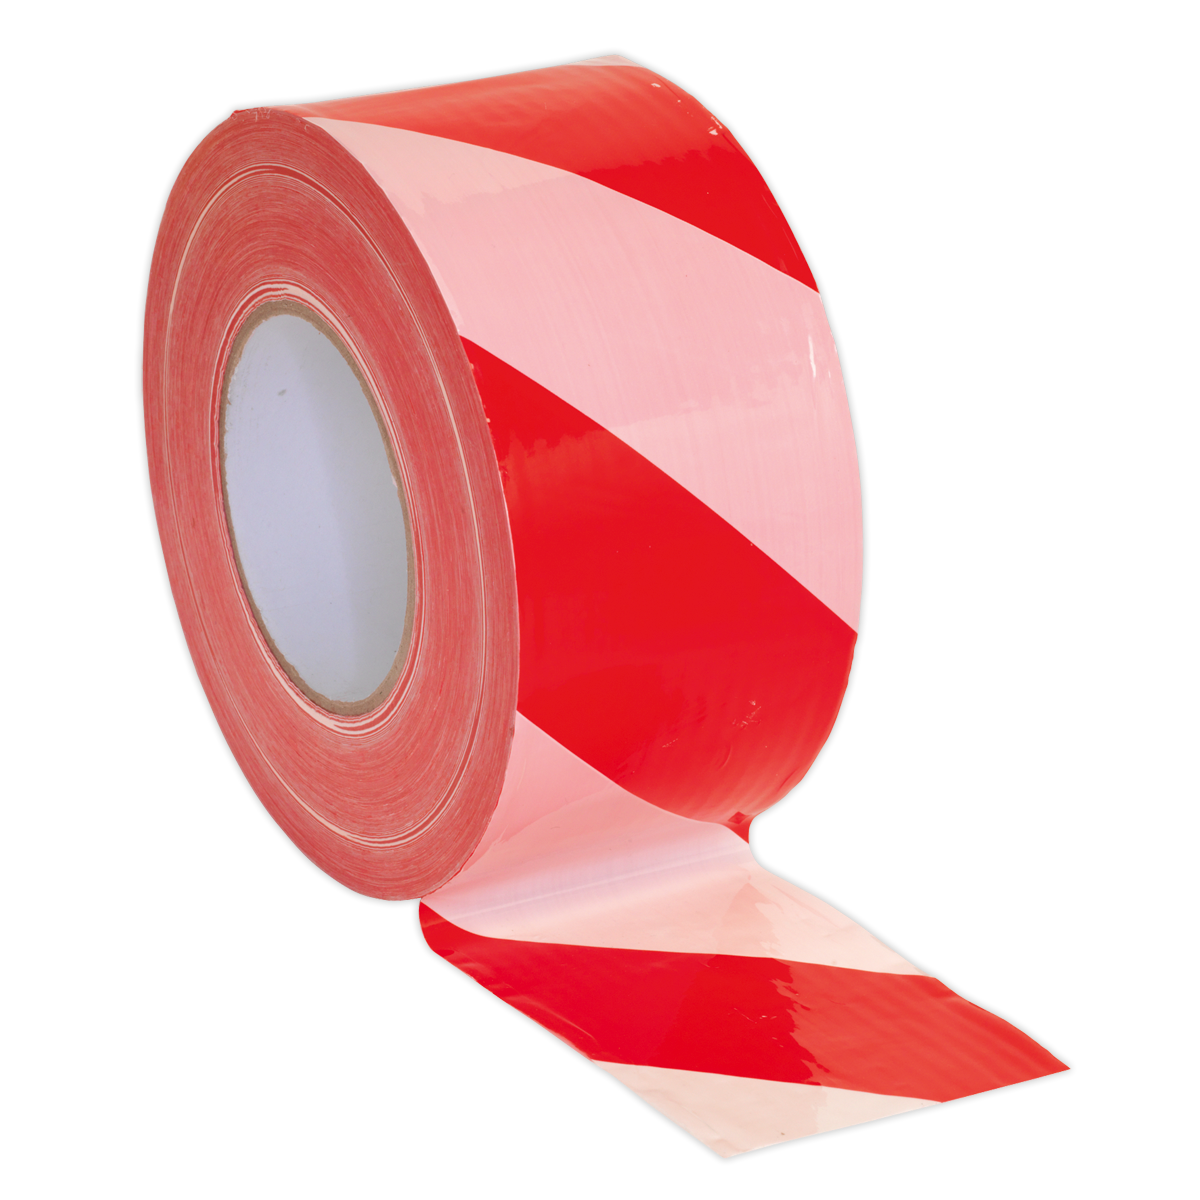 1 x Yuzet Barrier Warning Tape NON Adhesive Red/White 75mm x 500m Cordon